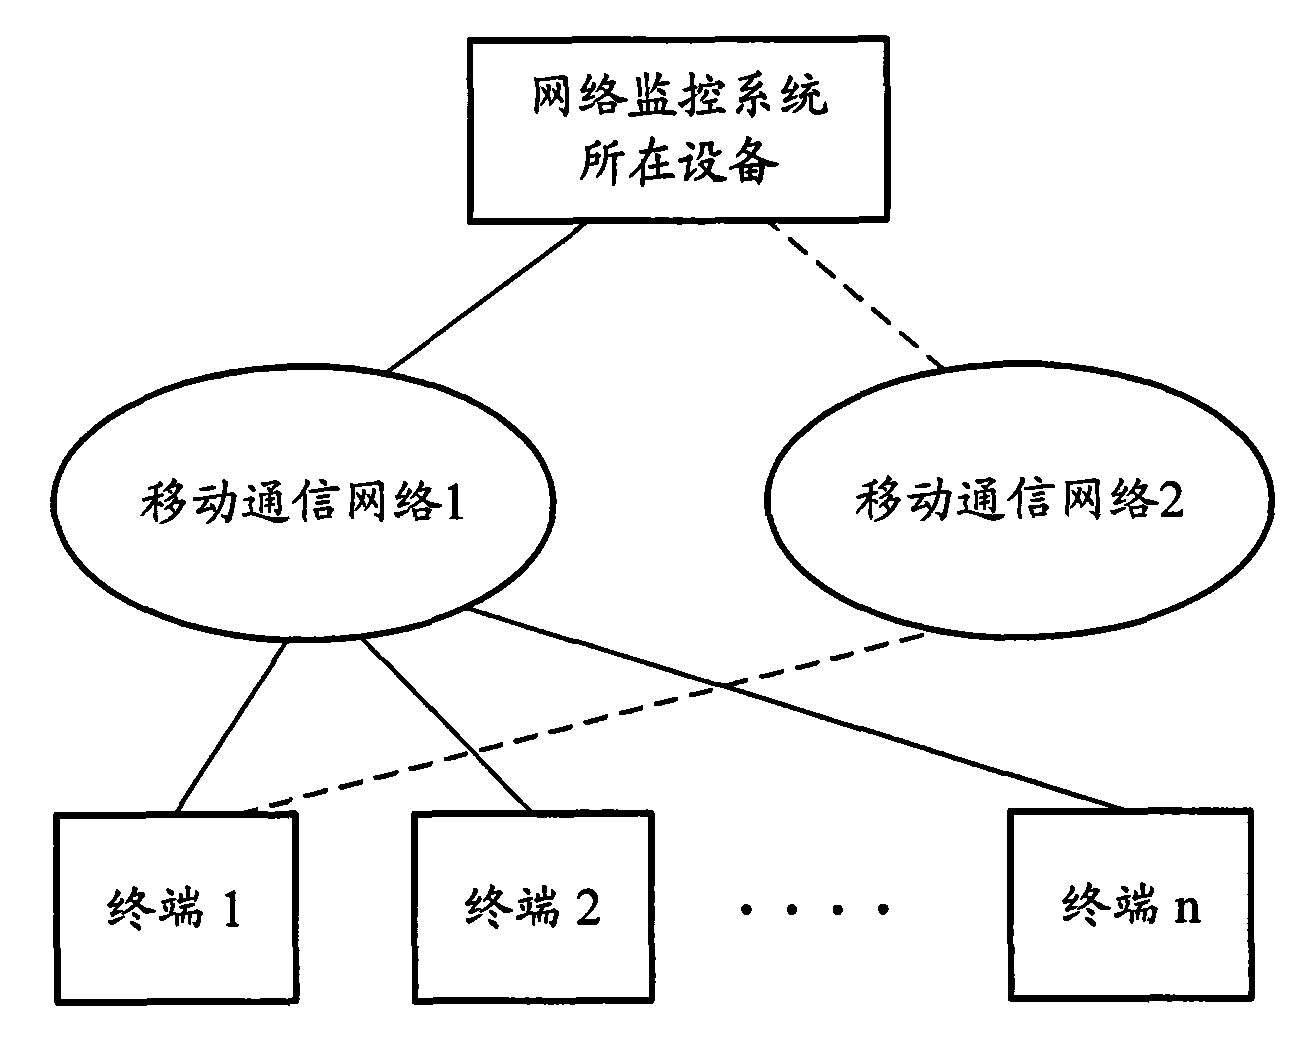 Network monitoring method and system thereof